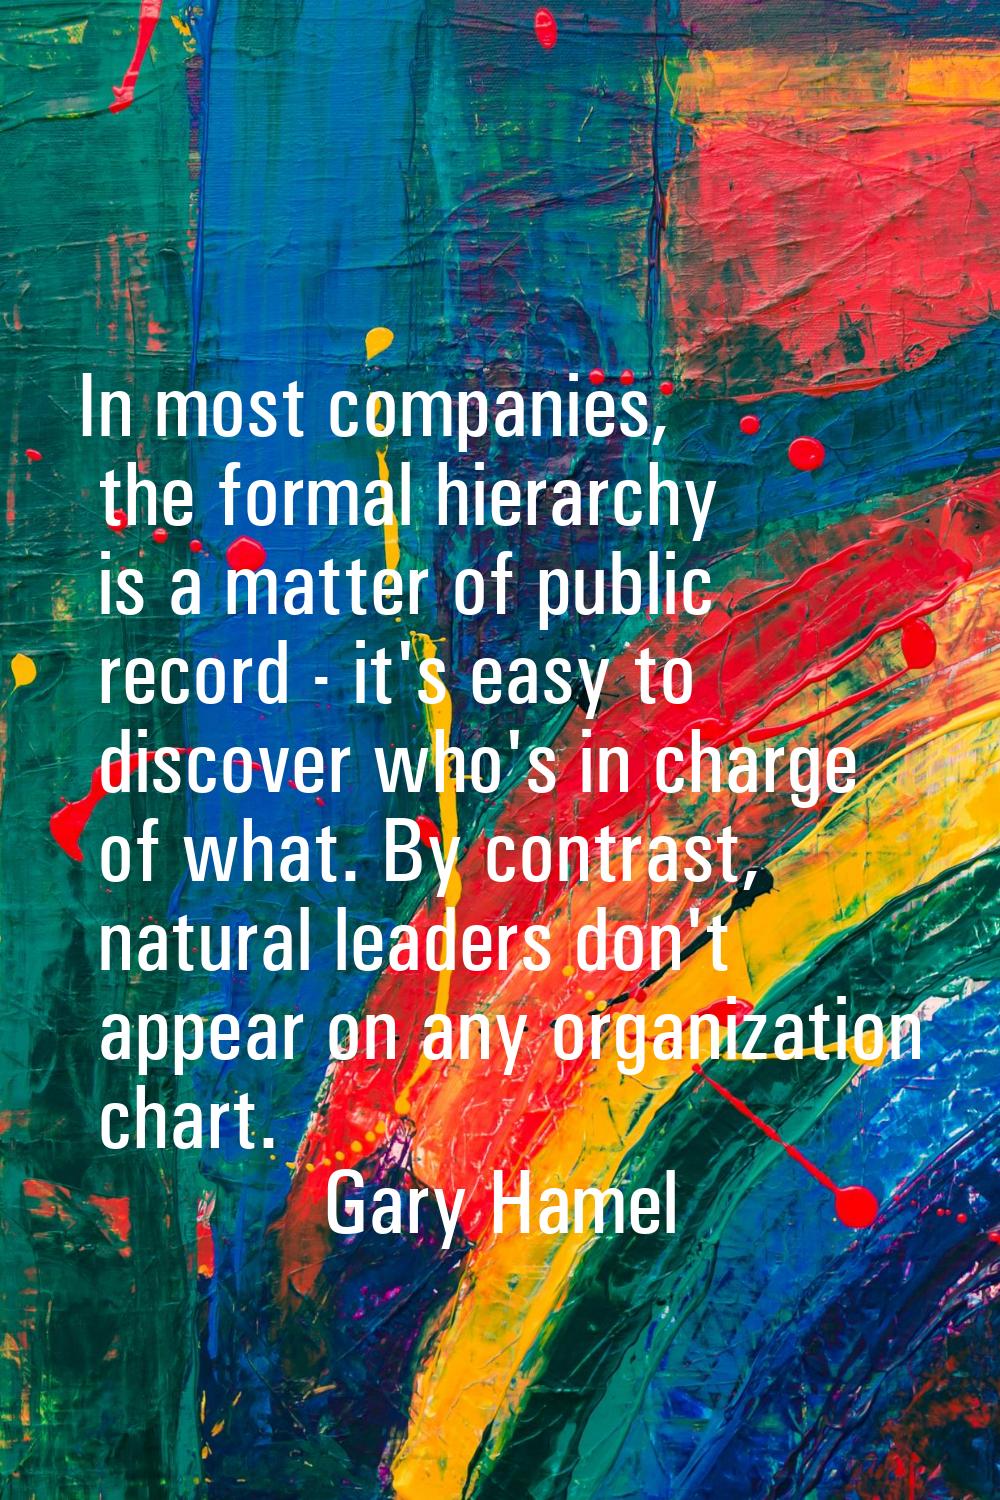 In most companies, the formal hierarchy is a matter of public record - it's easy to discover who's 